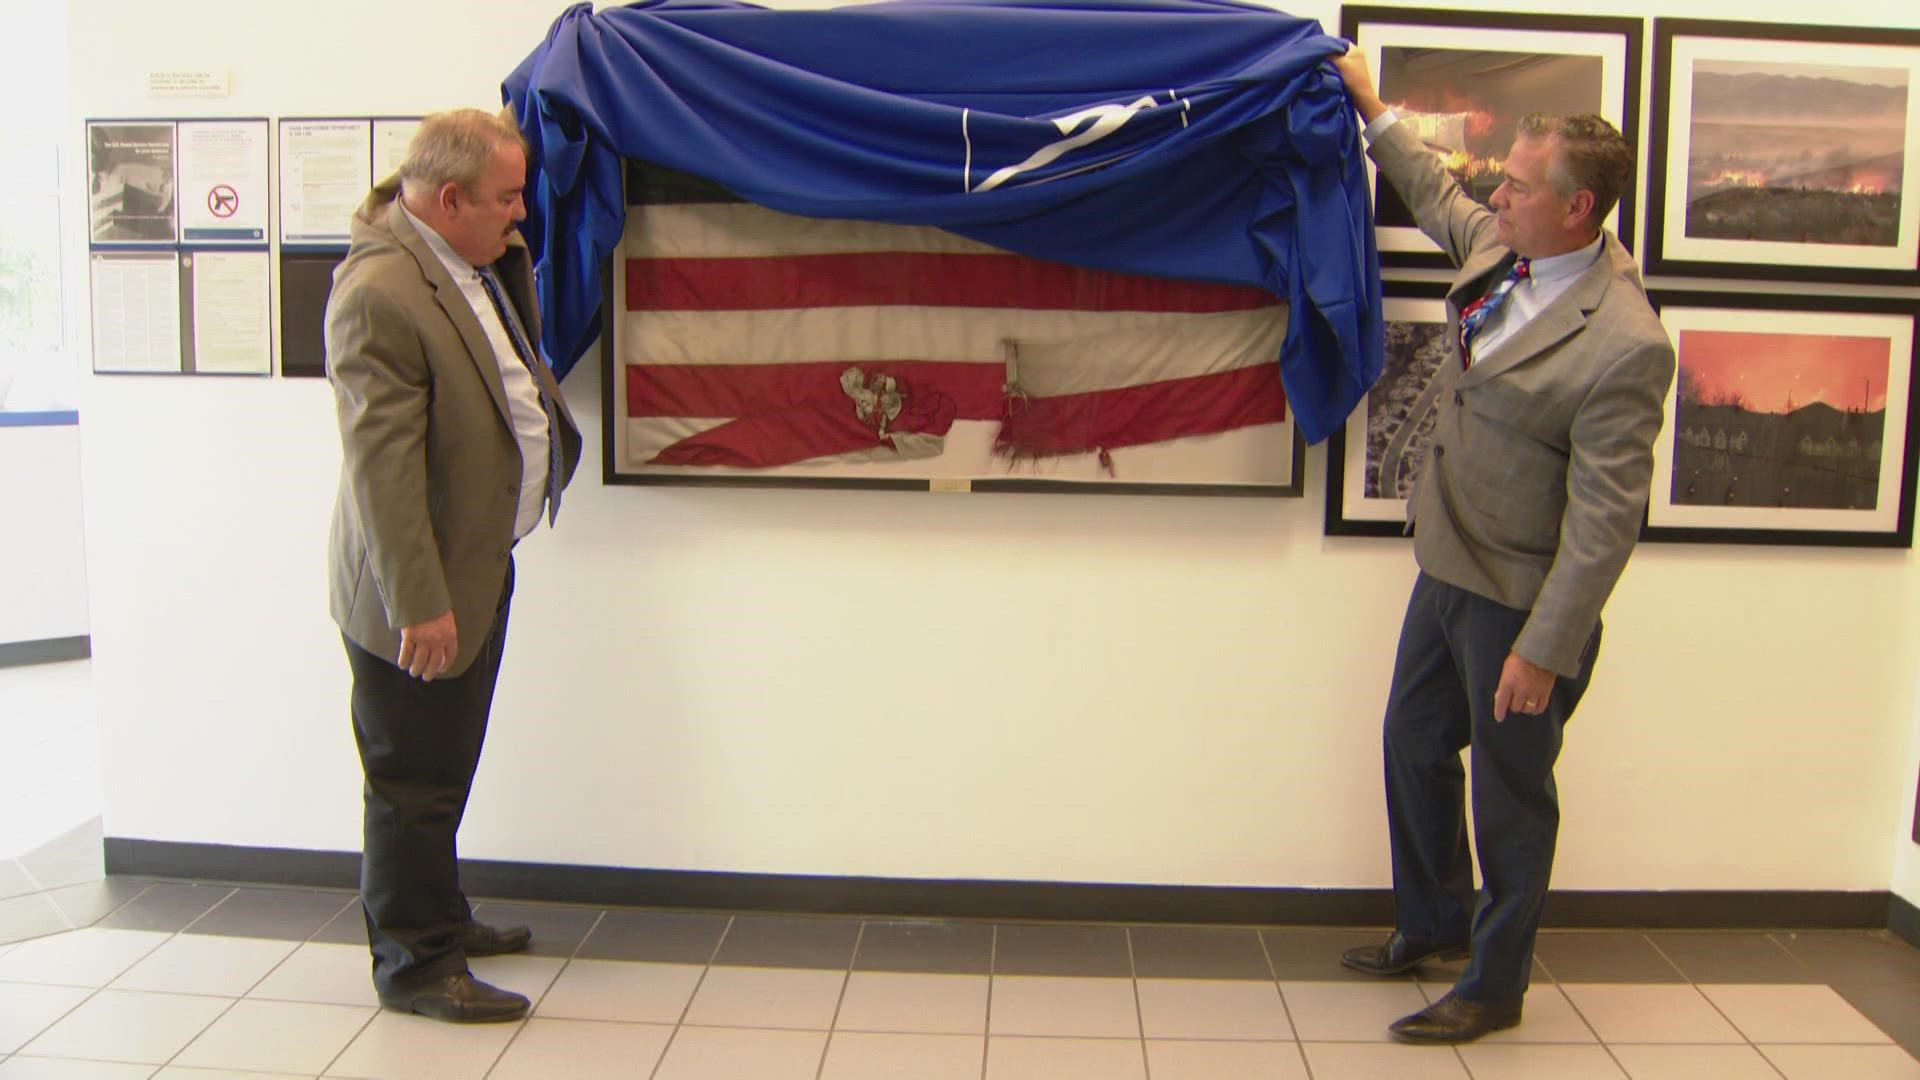 The flag flown over the Superior post office on the day of the Marshall Fire is now on display. The community sees it as a symbol of hope.